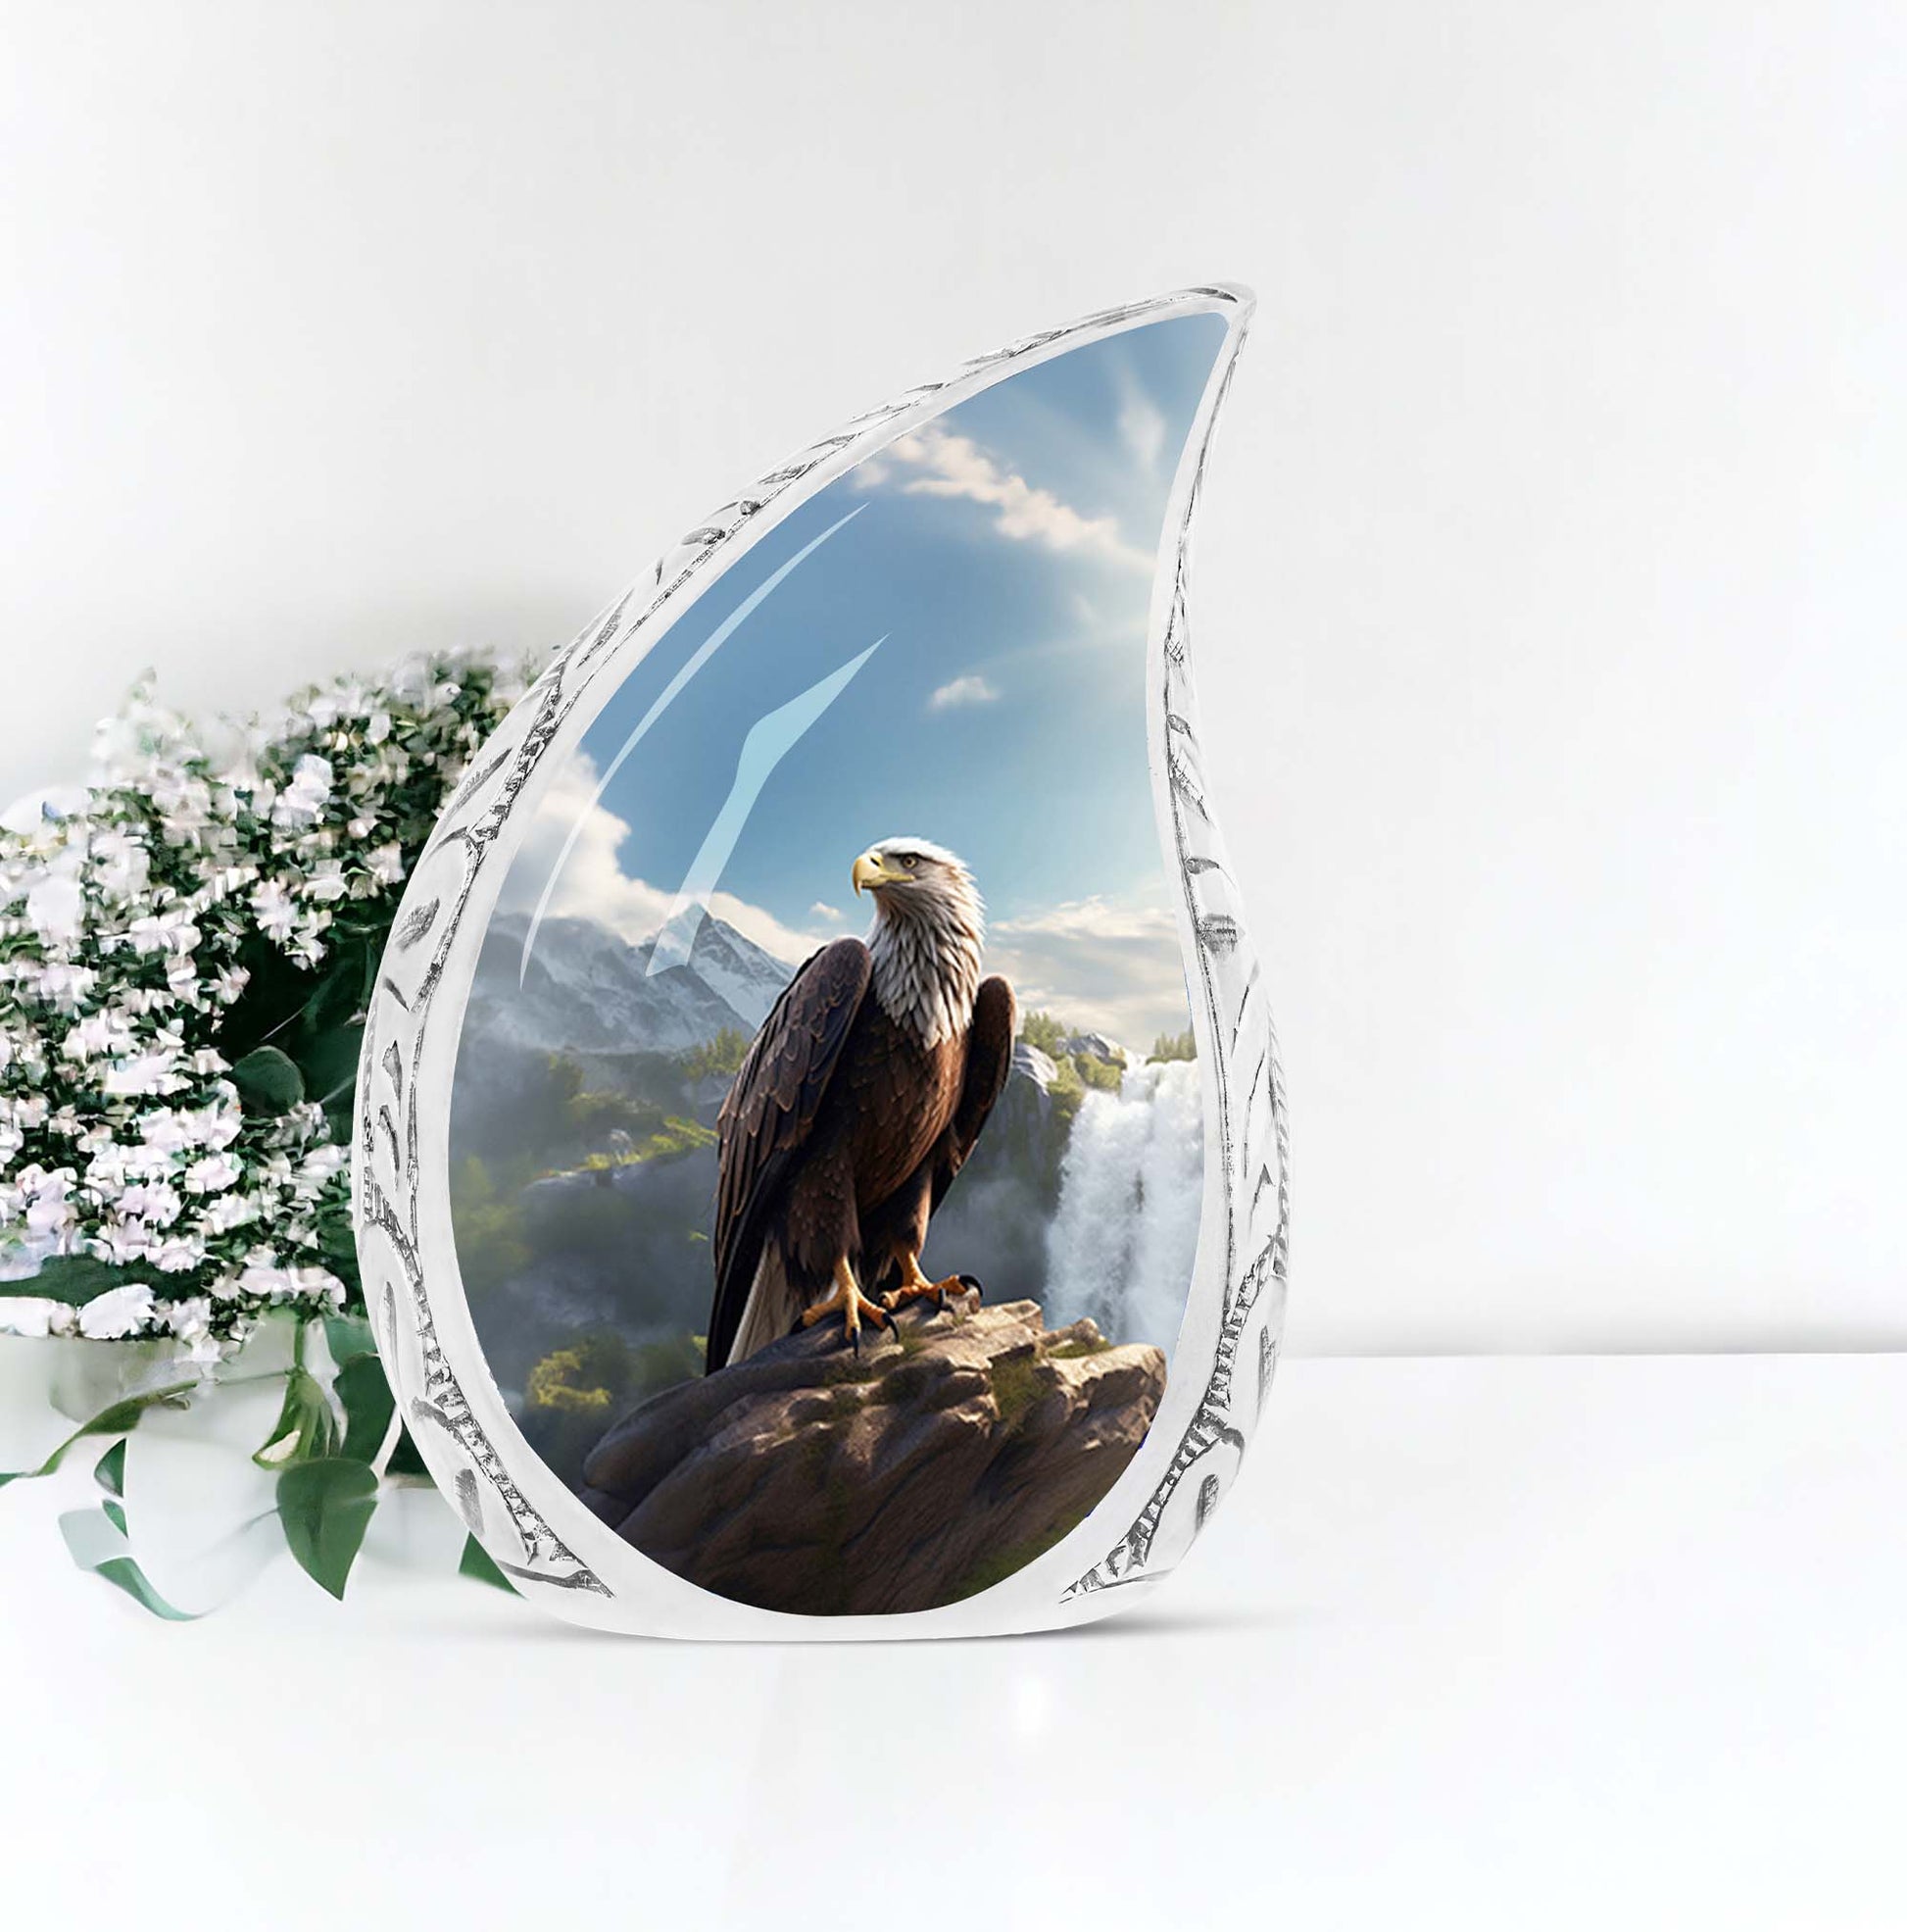 Large eagle-themed urn for human ashes, sitting by a waterfall, made of decorative metal